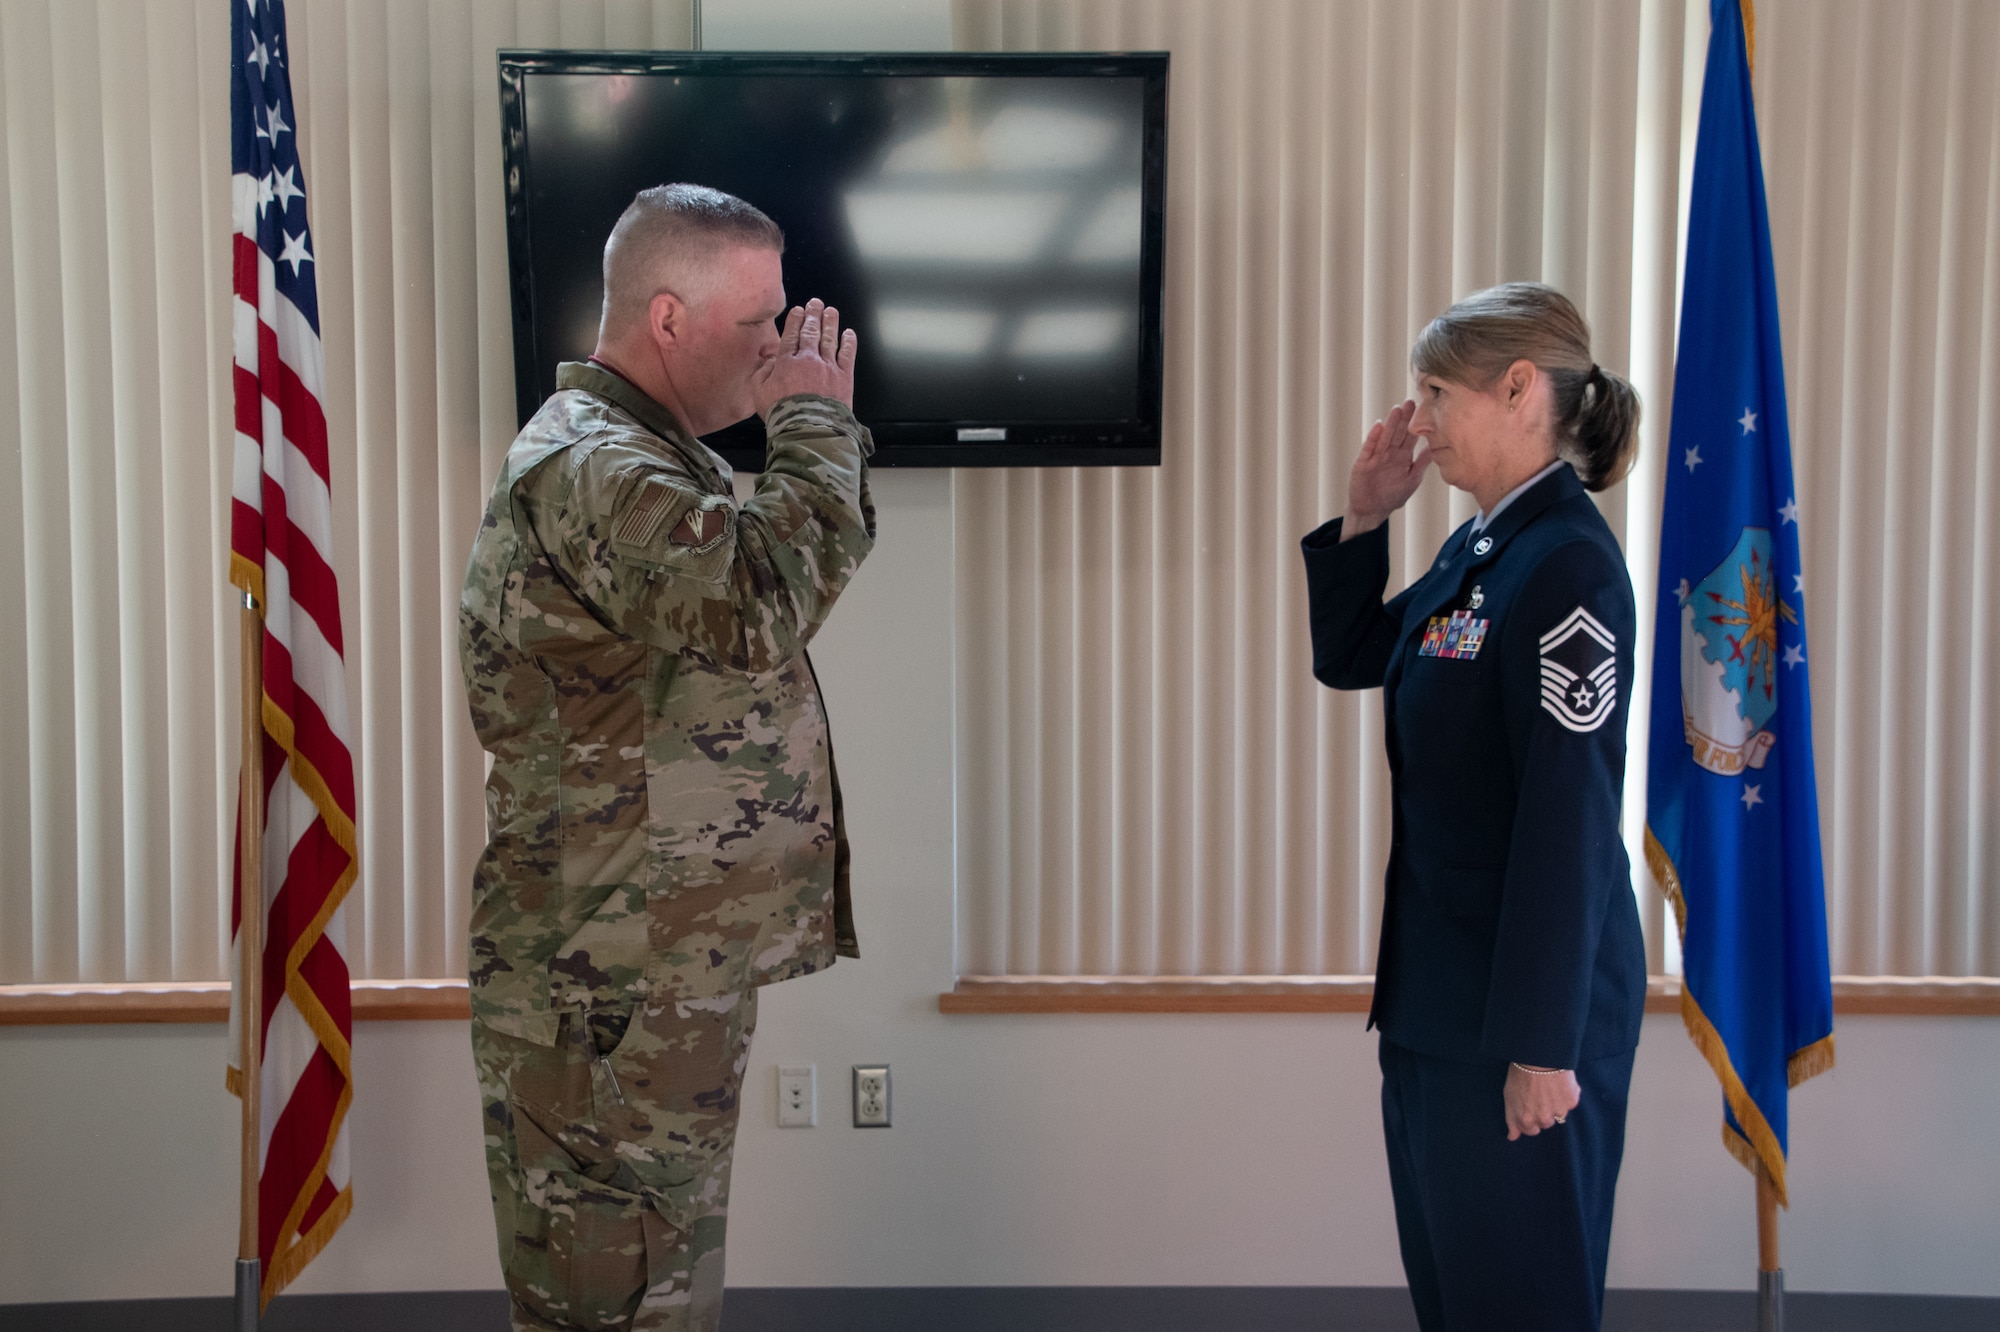 U.S. Air National Guard Lt. Col. Chad Larson, 131st Bomb Wing Maintenance Group commander, exchanges a salute with Chief Master Sgt. Jennifer Fanoele, 131st Bomb Wing Maintenance Operations Flight senior enlisted leader, at her promotion ceremony on the Royal Oak Golf Course, Knob Noster Missouri, April 1, 2023. Fanoele has served with distinction for 23 years and continues to be an asset to the Missouri Air National Guard. (U.S. Air National Guard photo by Senior Airman Kelly C. Ferguson)